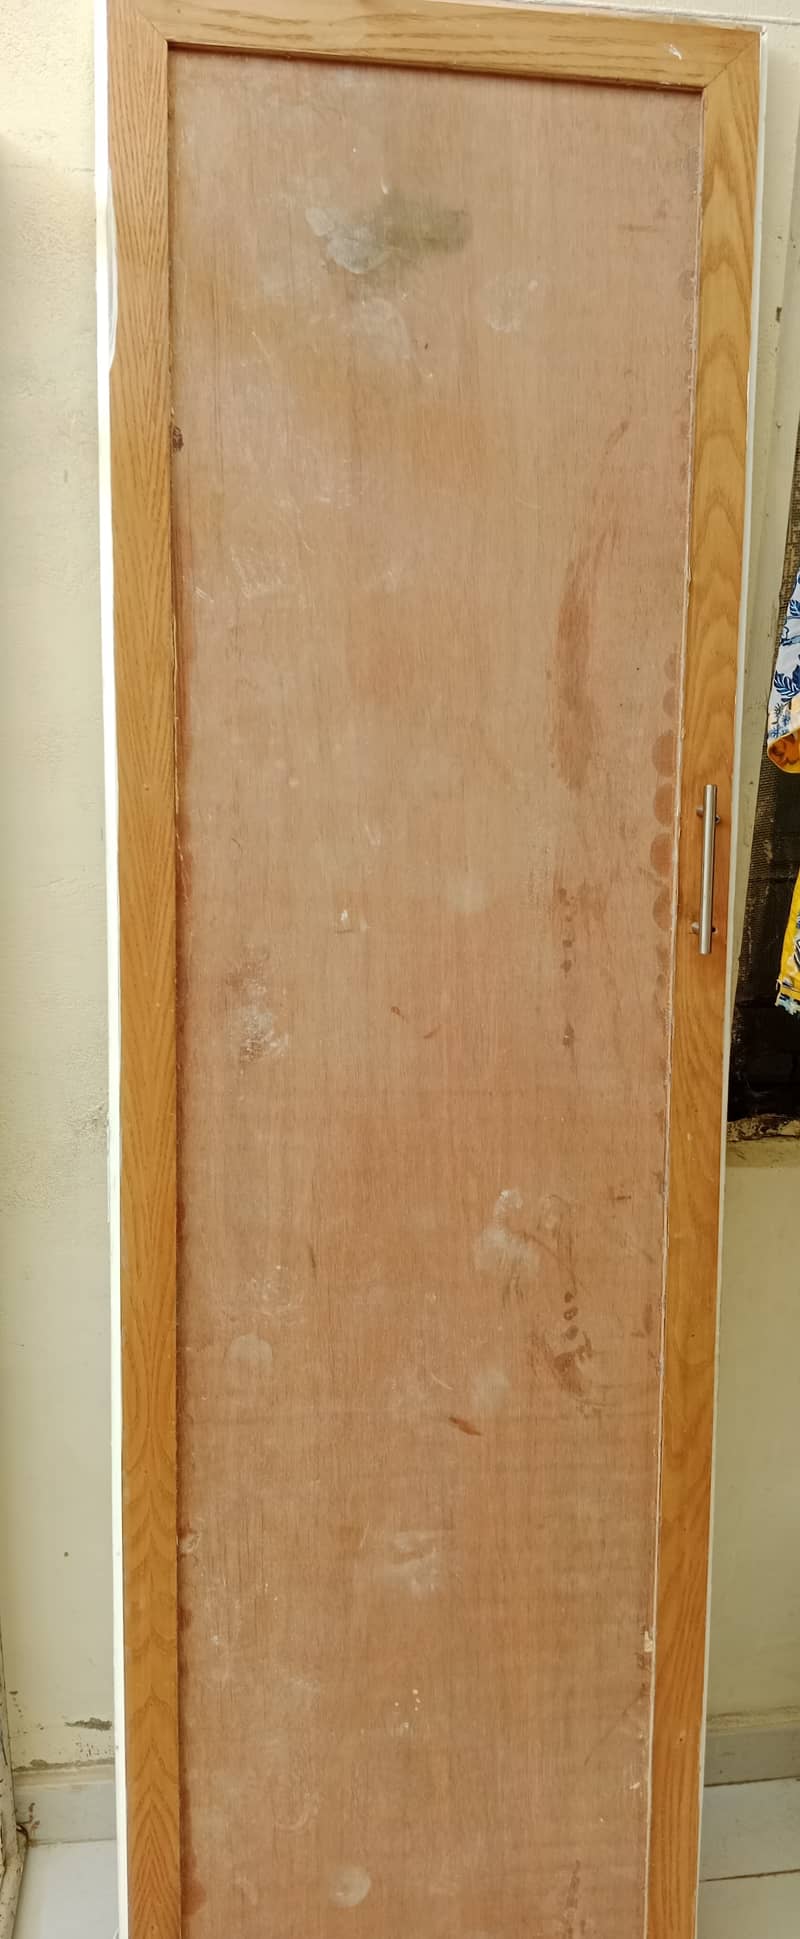 Door for sale neat and clean only WhatsUp 03060103003 0